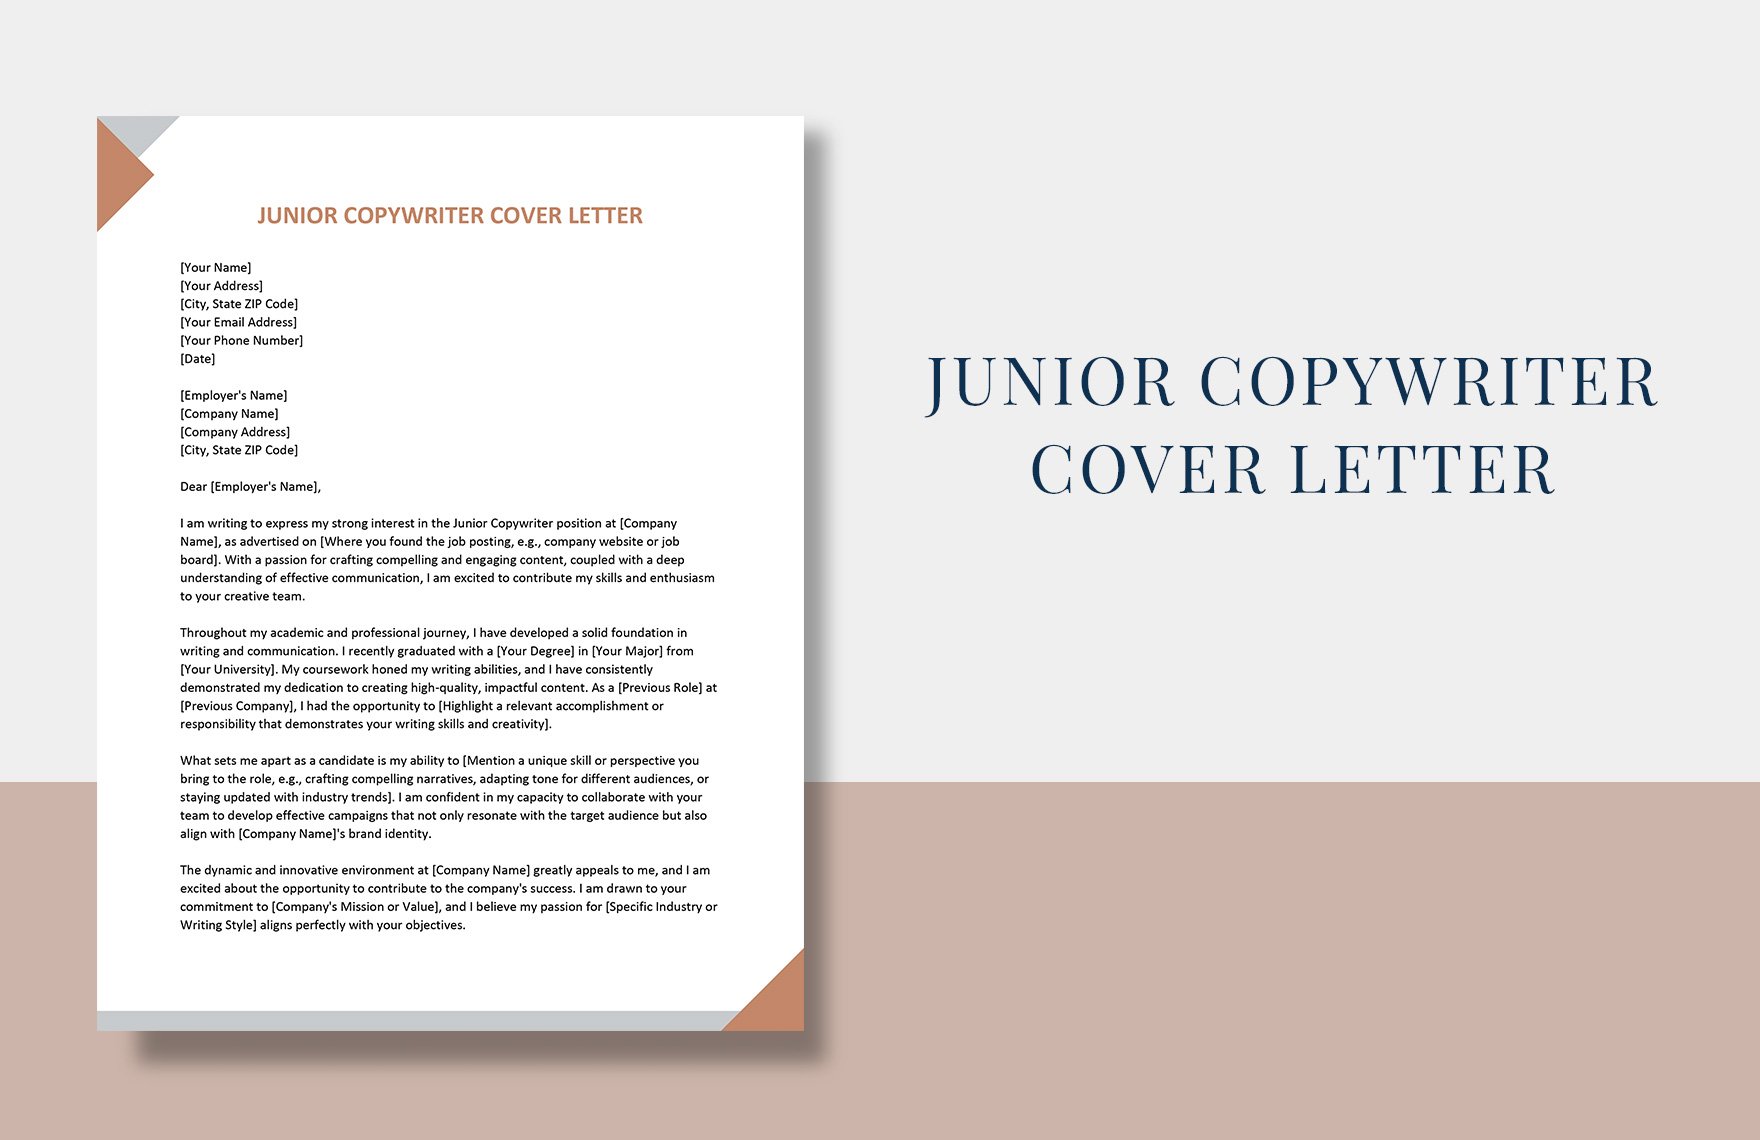 Junior Copywriter Cover Letter in Word, Google Docs, Apple Pages